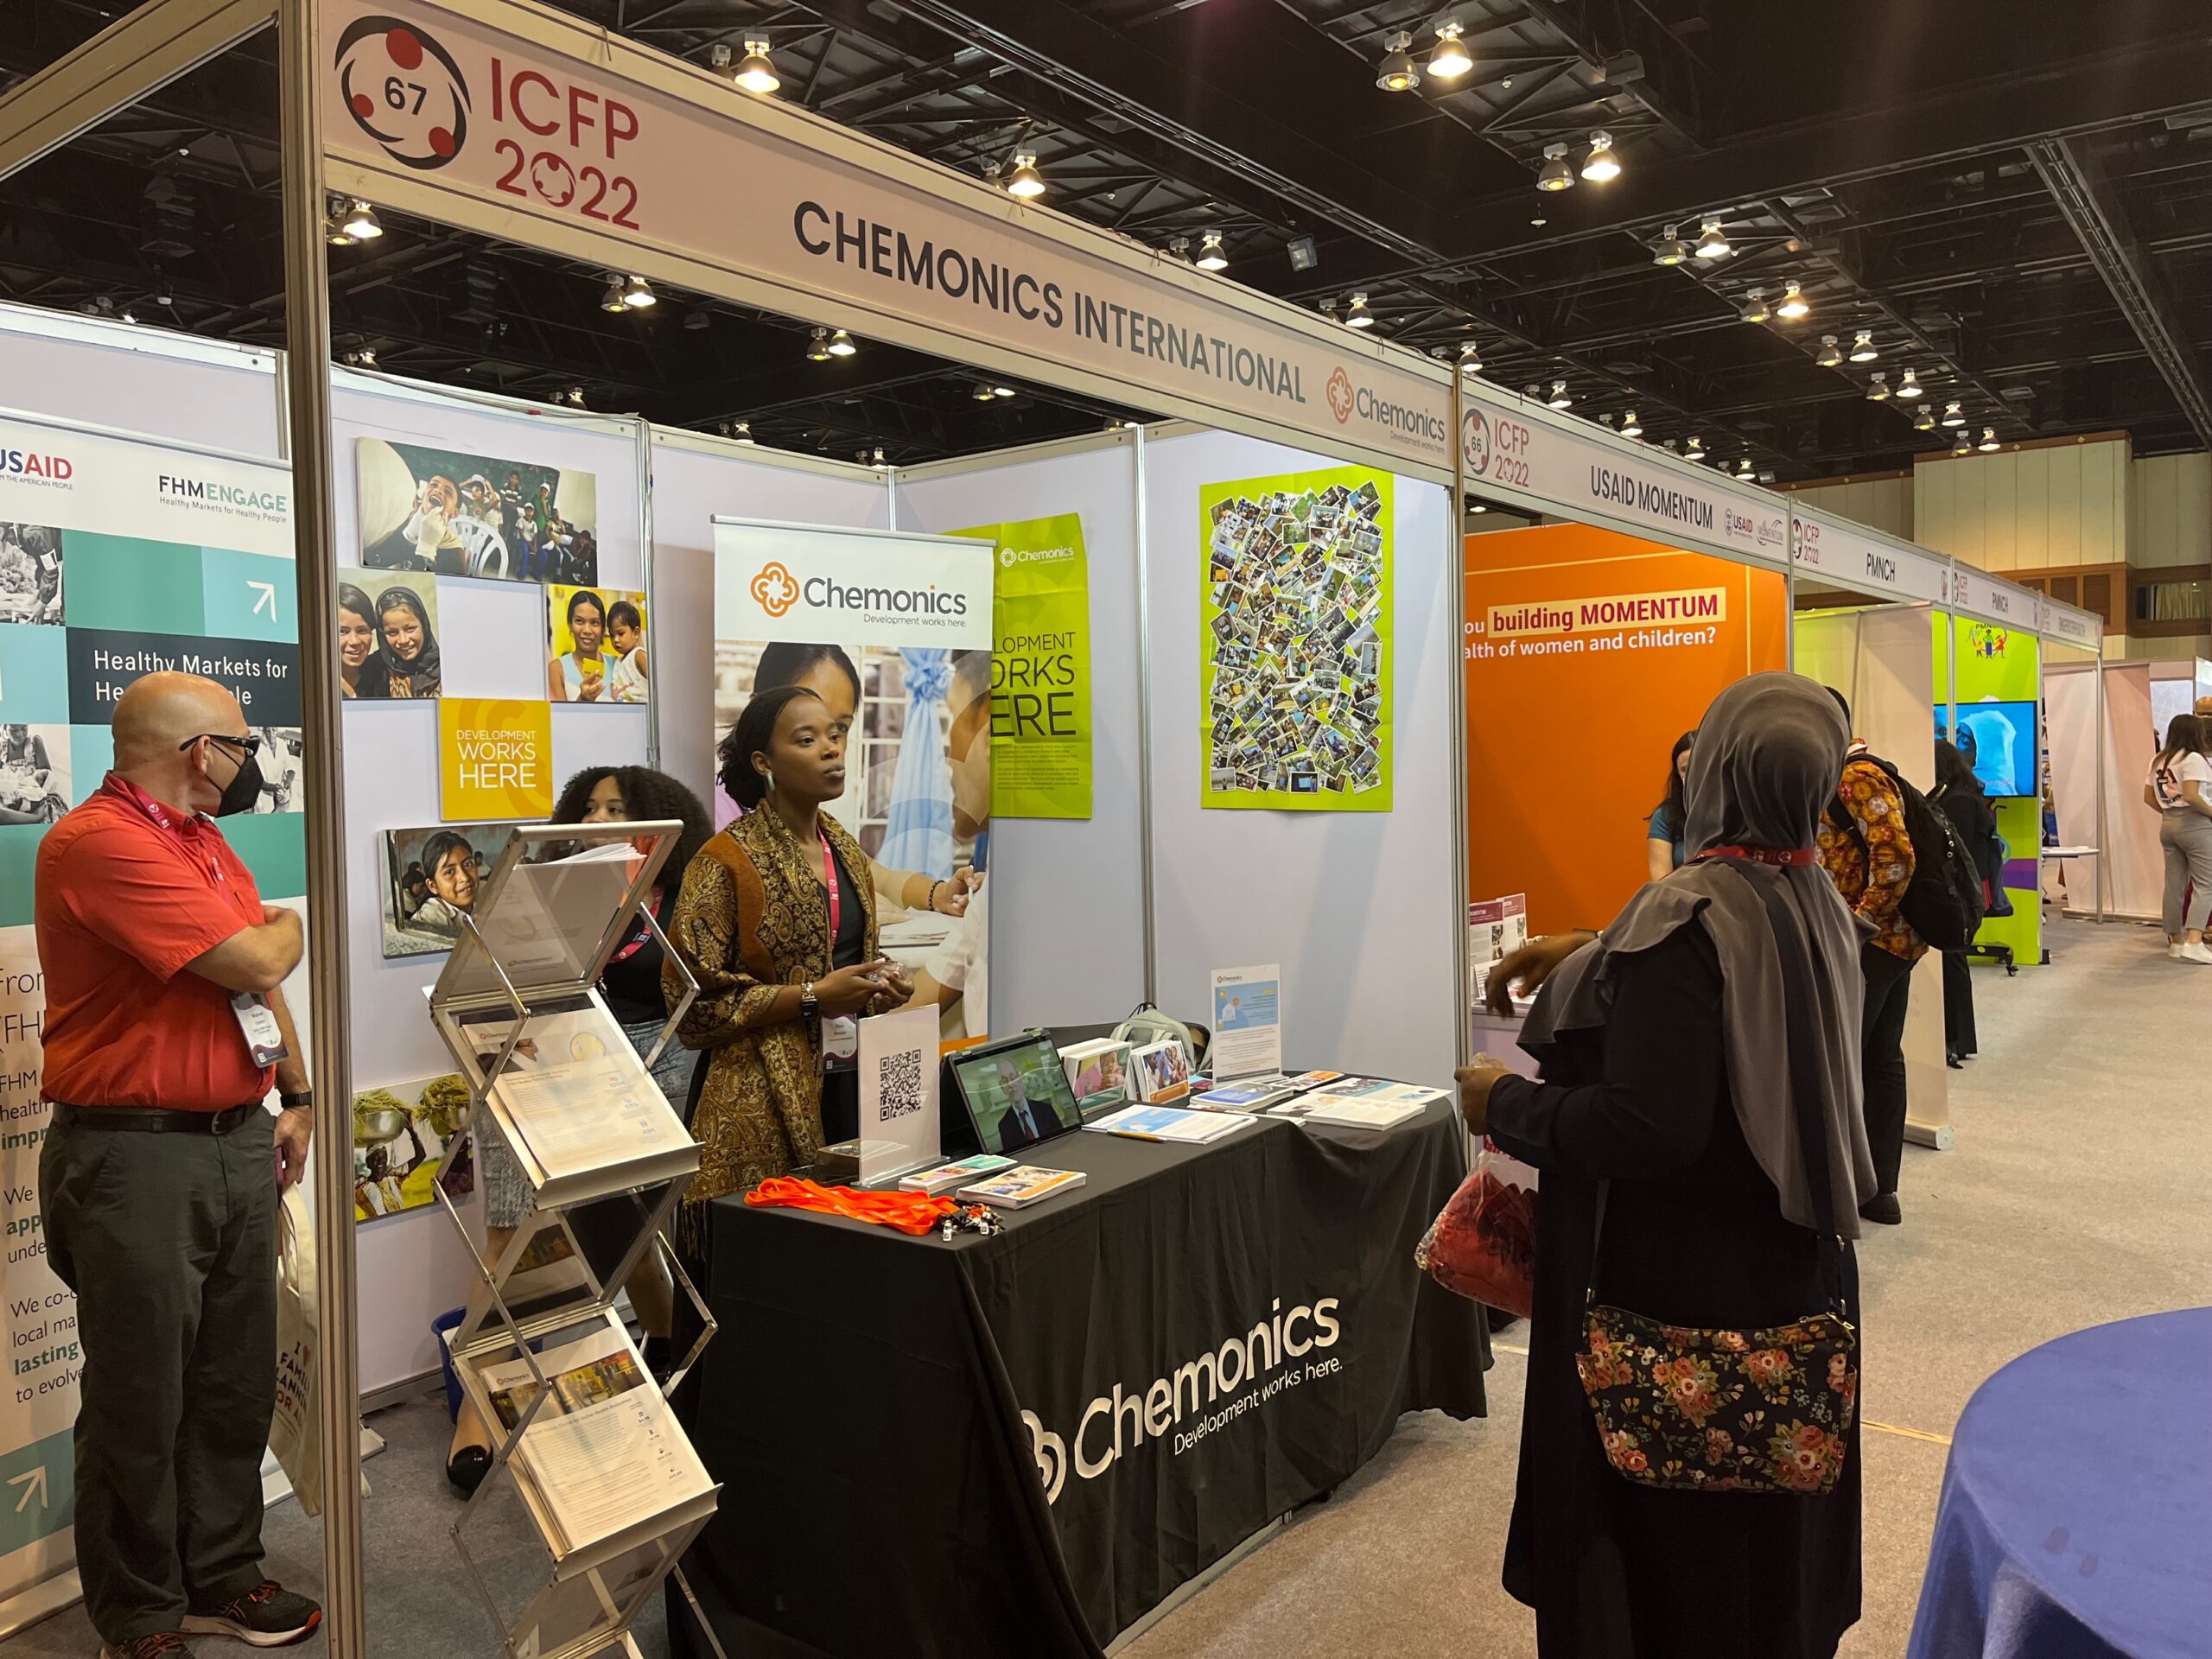 Image of a booth for Chemonics International at a convention. A woman tending the booth is speaking to a visitor.